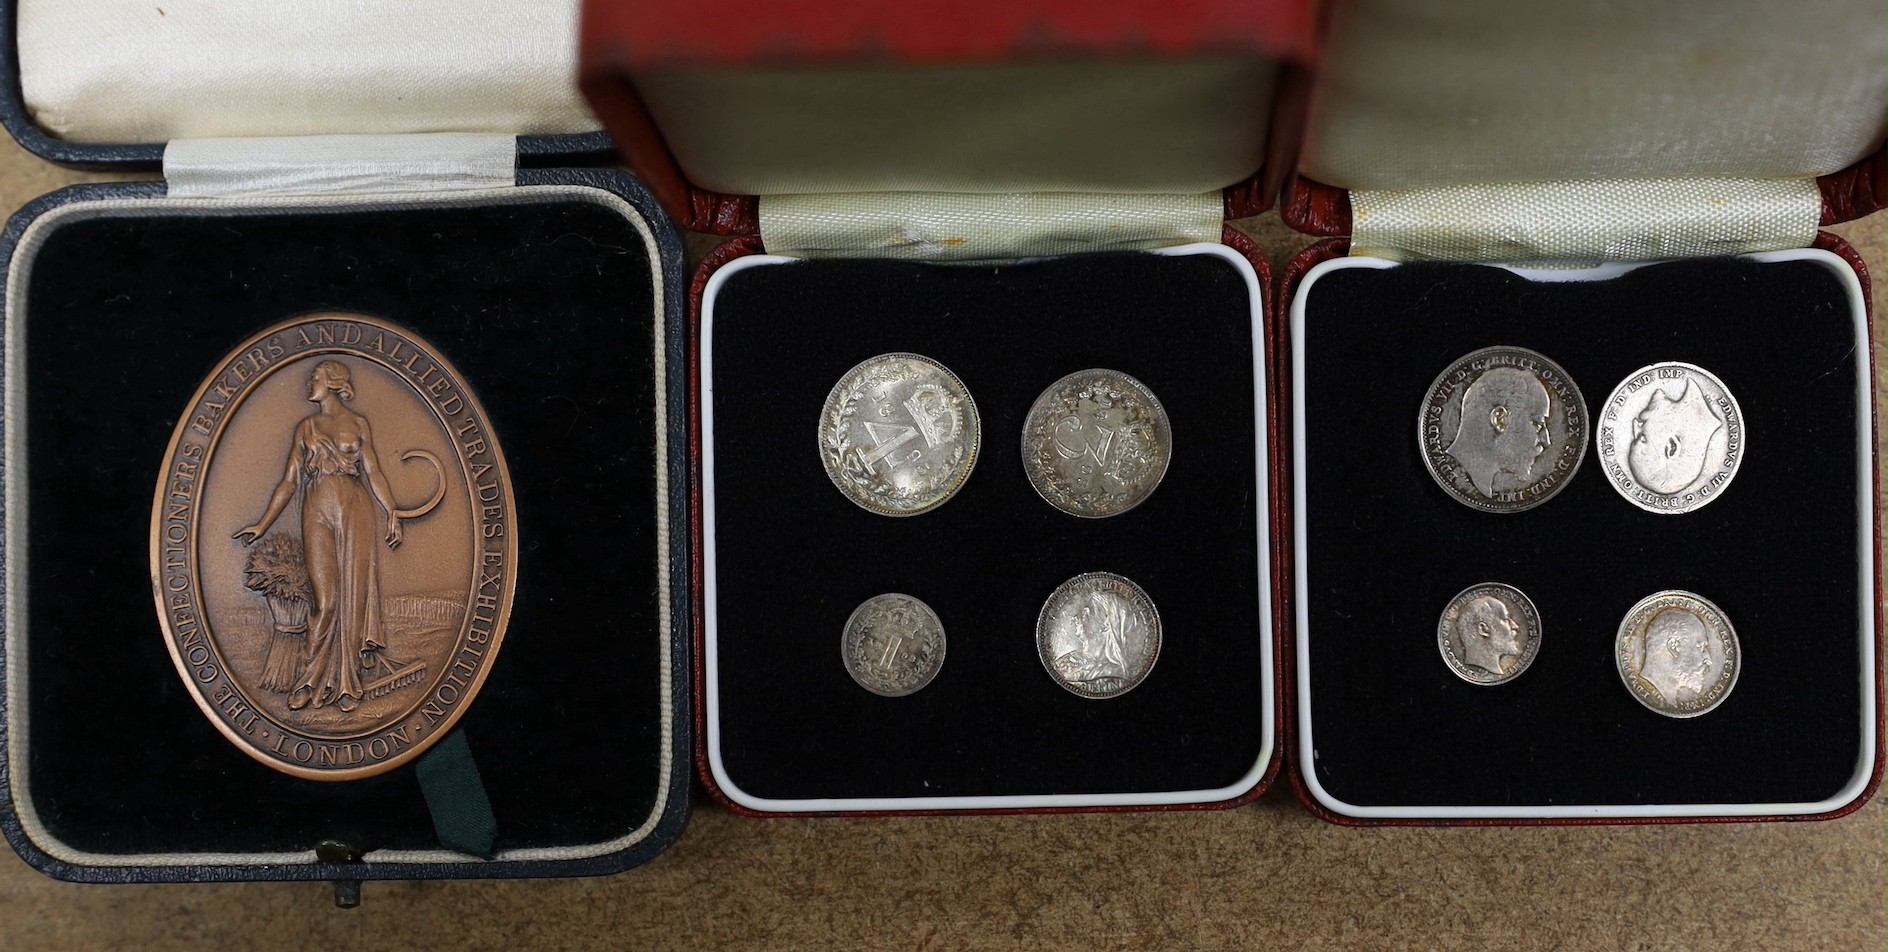 UK coins - Victoria maundy sets, 1899 in original case, 1893 in a later case, George V Maundy set 1915, later case and Edward VII maundy set 1904, later case, 3d worn, Together with various 19th/20th century commemorativ